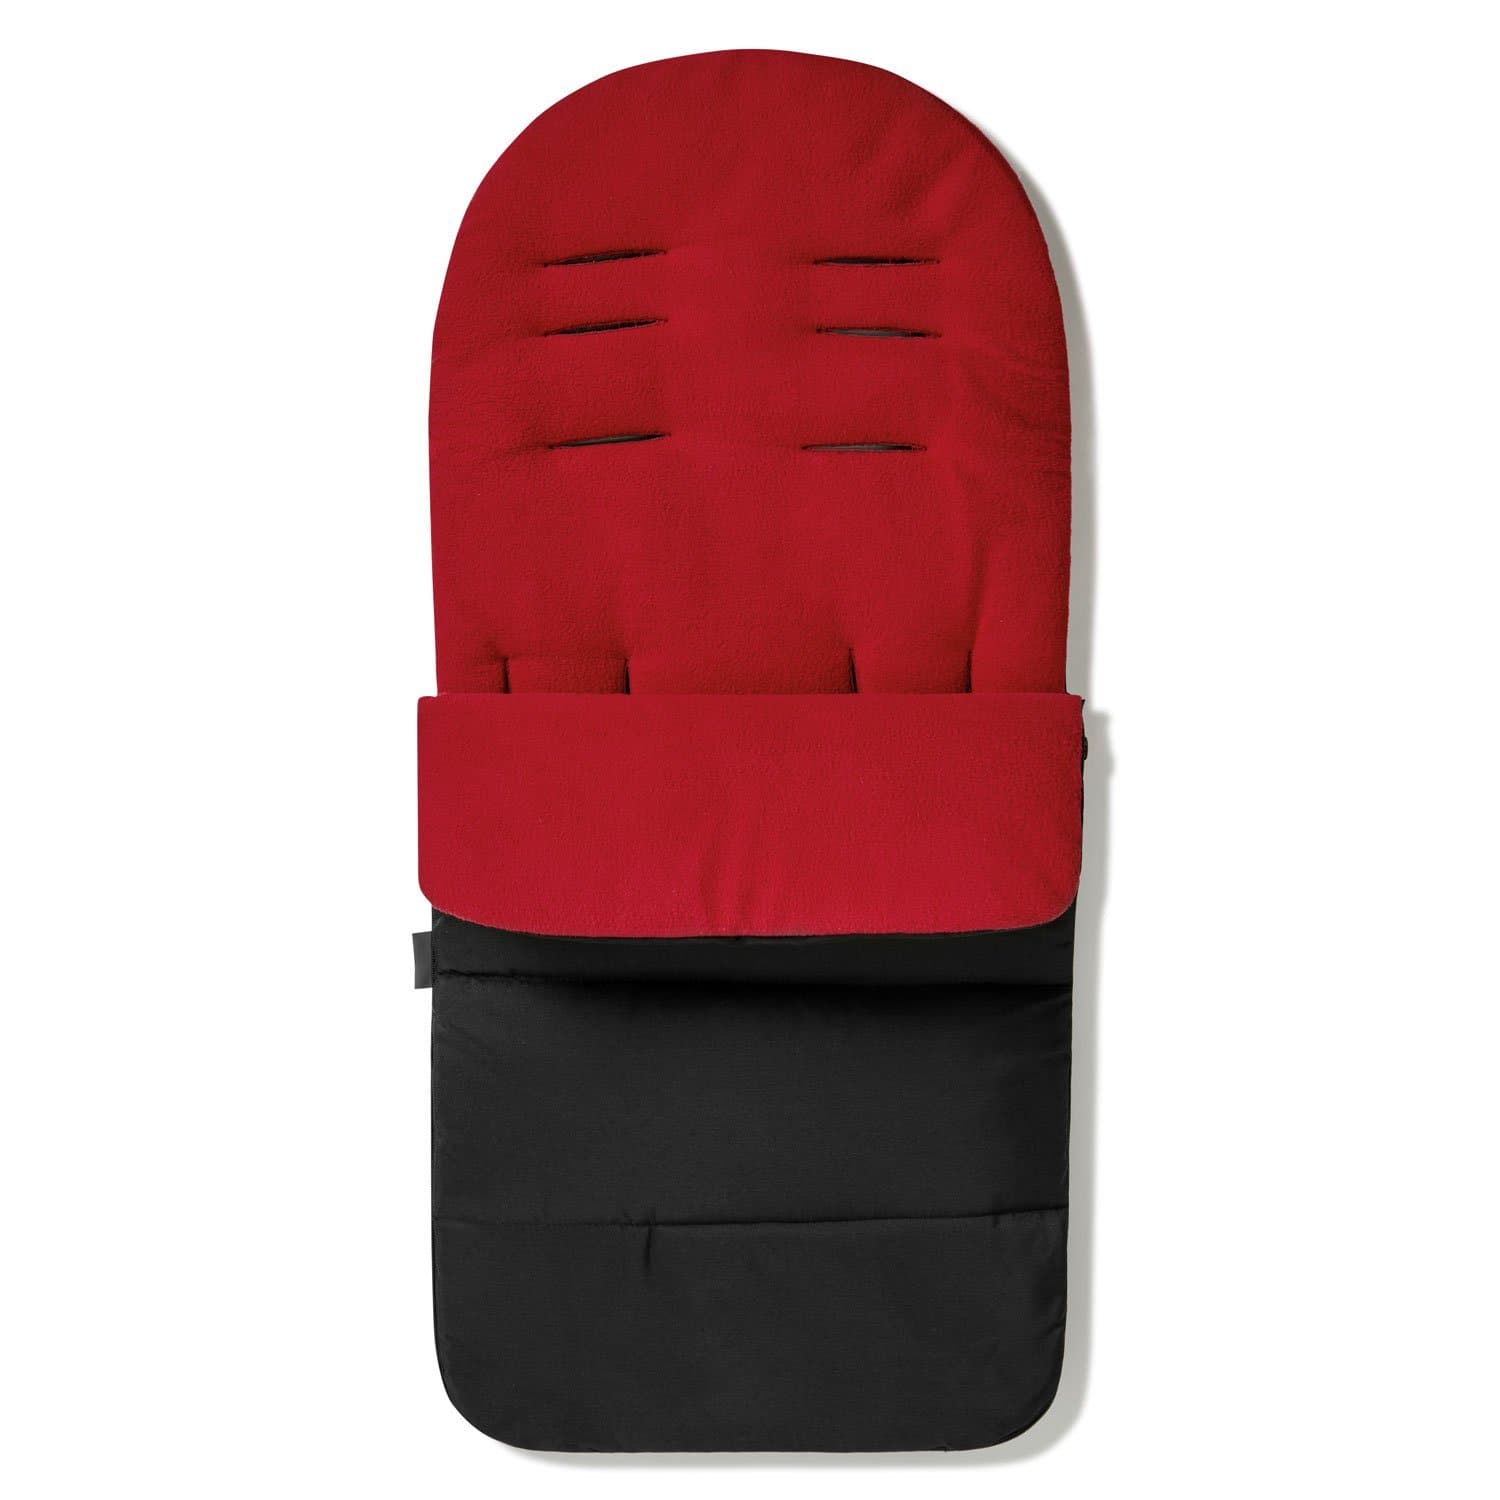 Premium Footmuff / Cosy Toes Compatible with Chicco - Fire Red / Fits All Models | For Your Little One